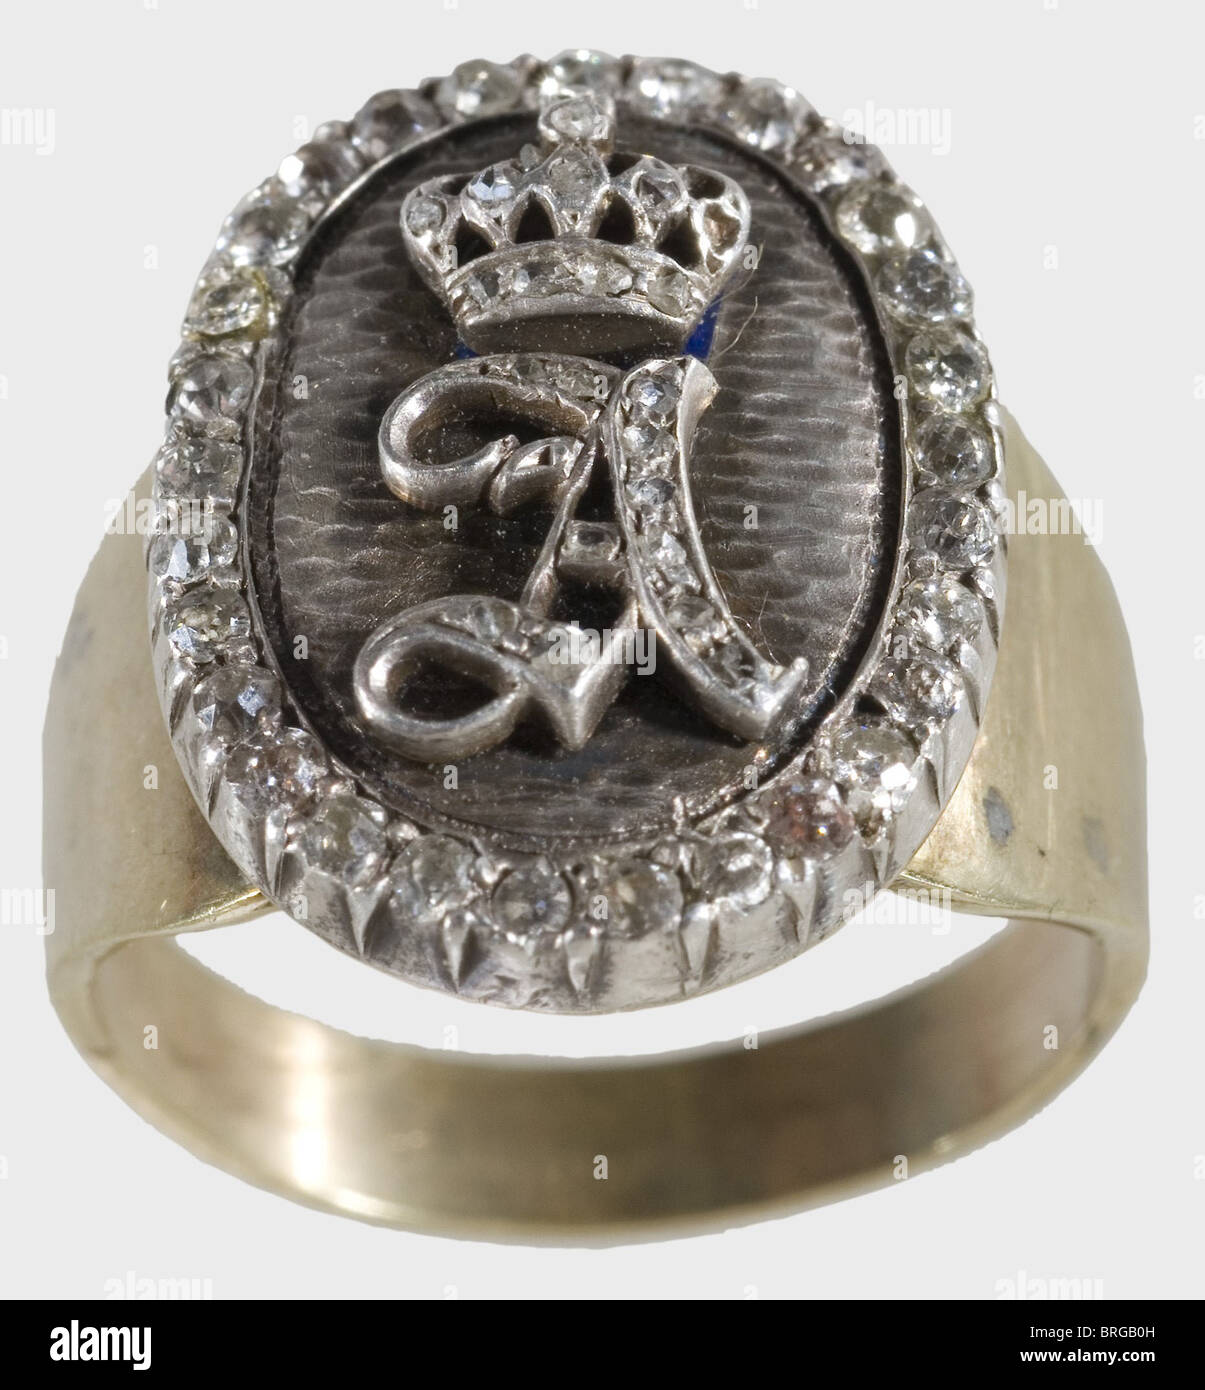 Prince Alfons of Bavaria(1862 - 1933),a monogrammed presentation ring Finger ring,gold,marked '333',face with oval silver medallion,engraved enamel background,imposed the crowned letter 'A' formed by 19 old cut diamonds. Edge of the medallion studded with 30 old cut diamonds. Medallion 19 x 14.5 cm. Ring diameter ca. 18 mm.,historic,historical,19th century,Bavaria,Bavarian,German,Germany,Southern Germany,the South of Germany,object,objects,stills,militaria,clipping,cut out,cut-out,cut-outs,fine arts,art,art object,art objects,artful,Additional-Rights-Clearences-Not Available Stock Photo